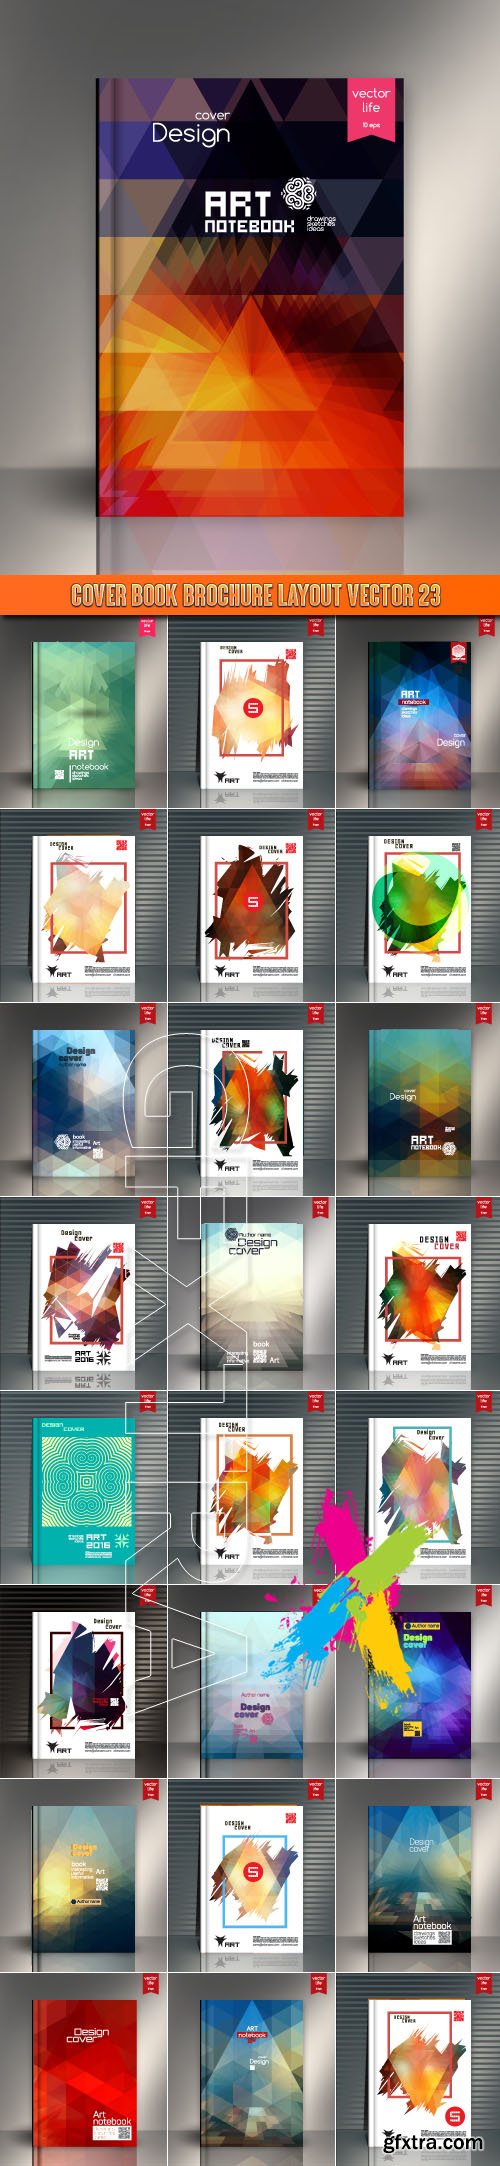 Cover book brochure layout vector 23